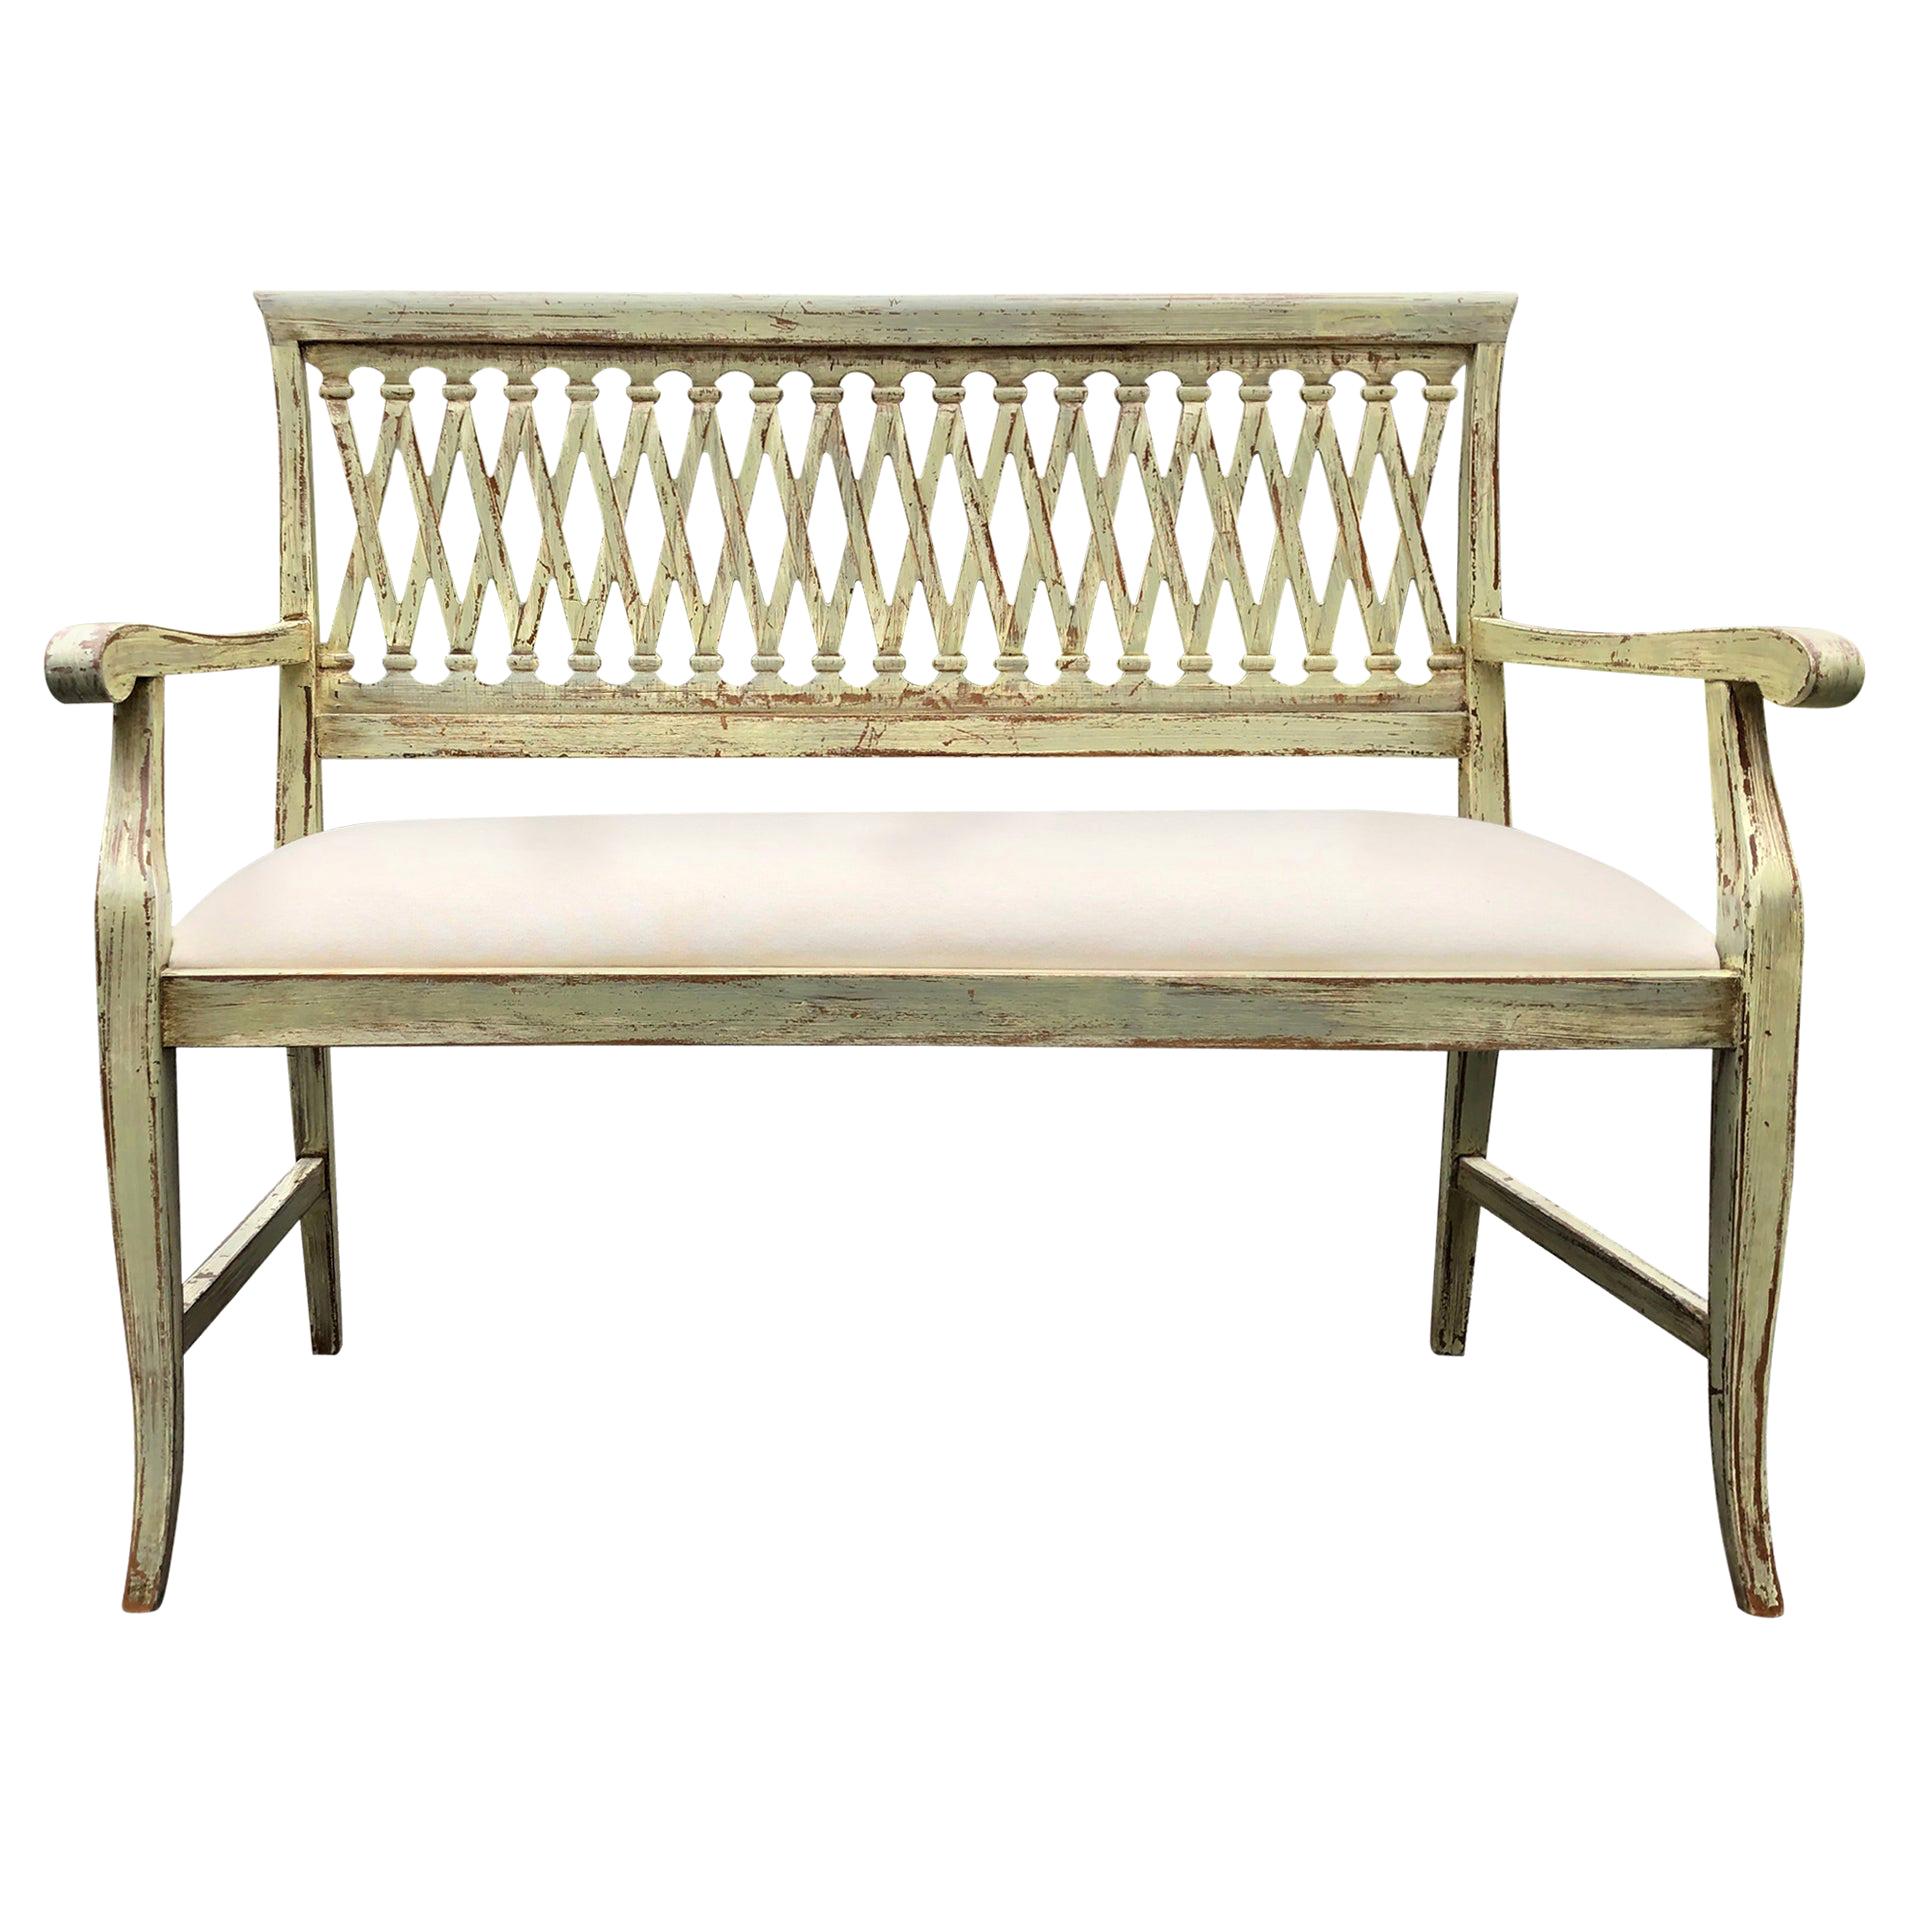 Charming Distressed Painted Bench with Lattice Style Back